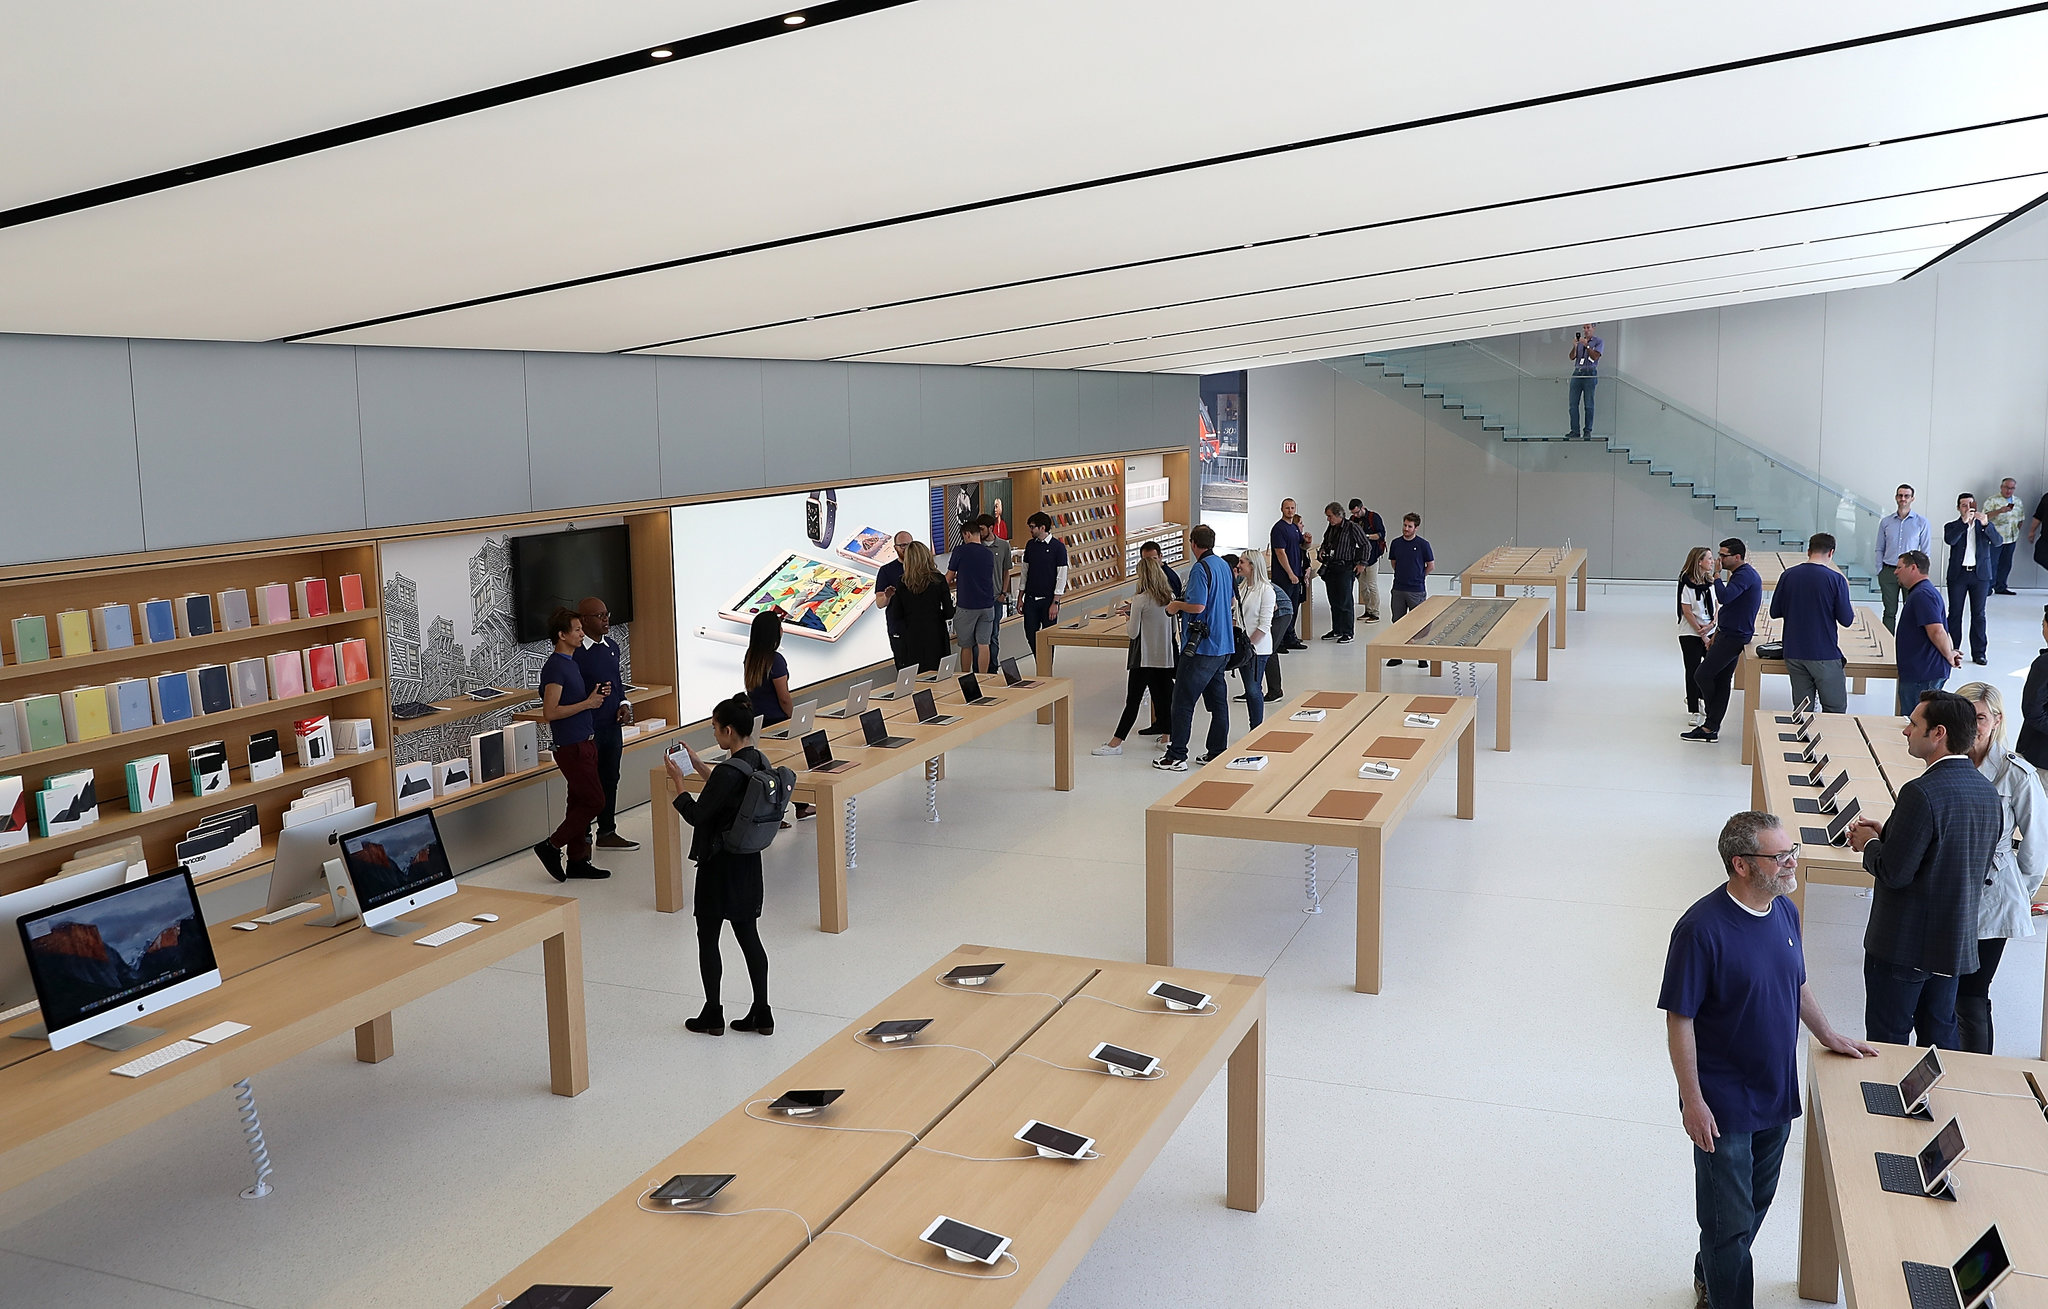 Apple’s Q1 Performance: A Blend of Challenges and Strategic Financial Maneuvers